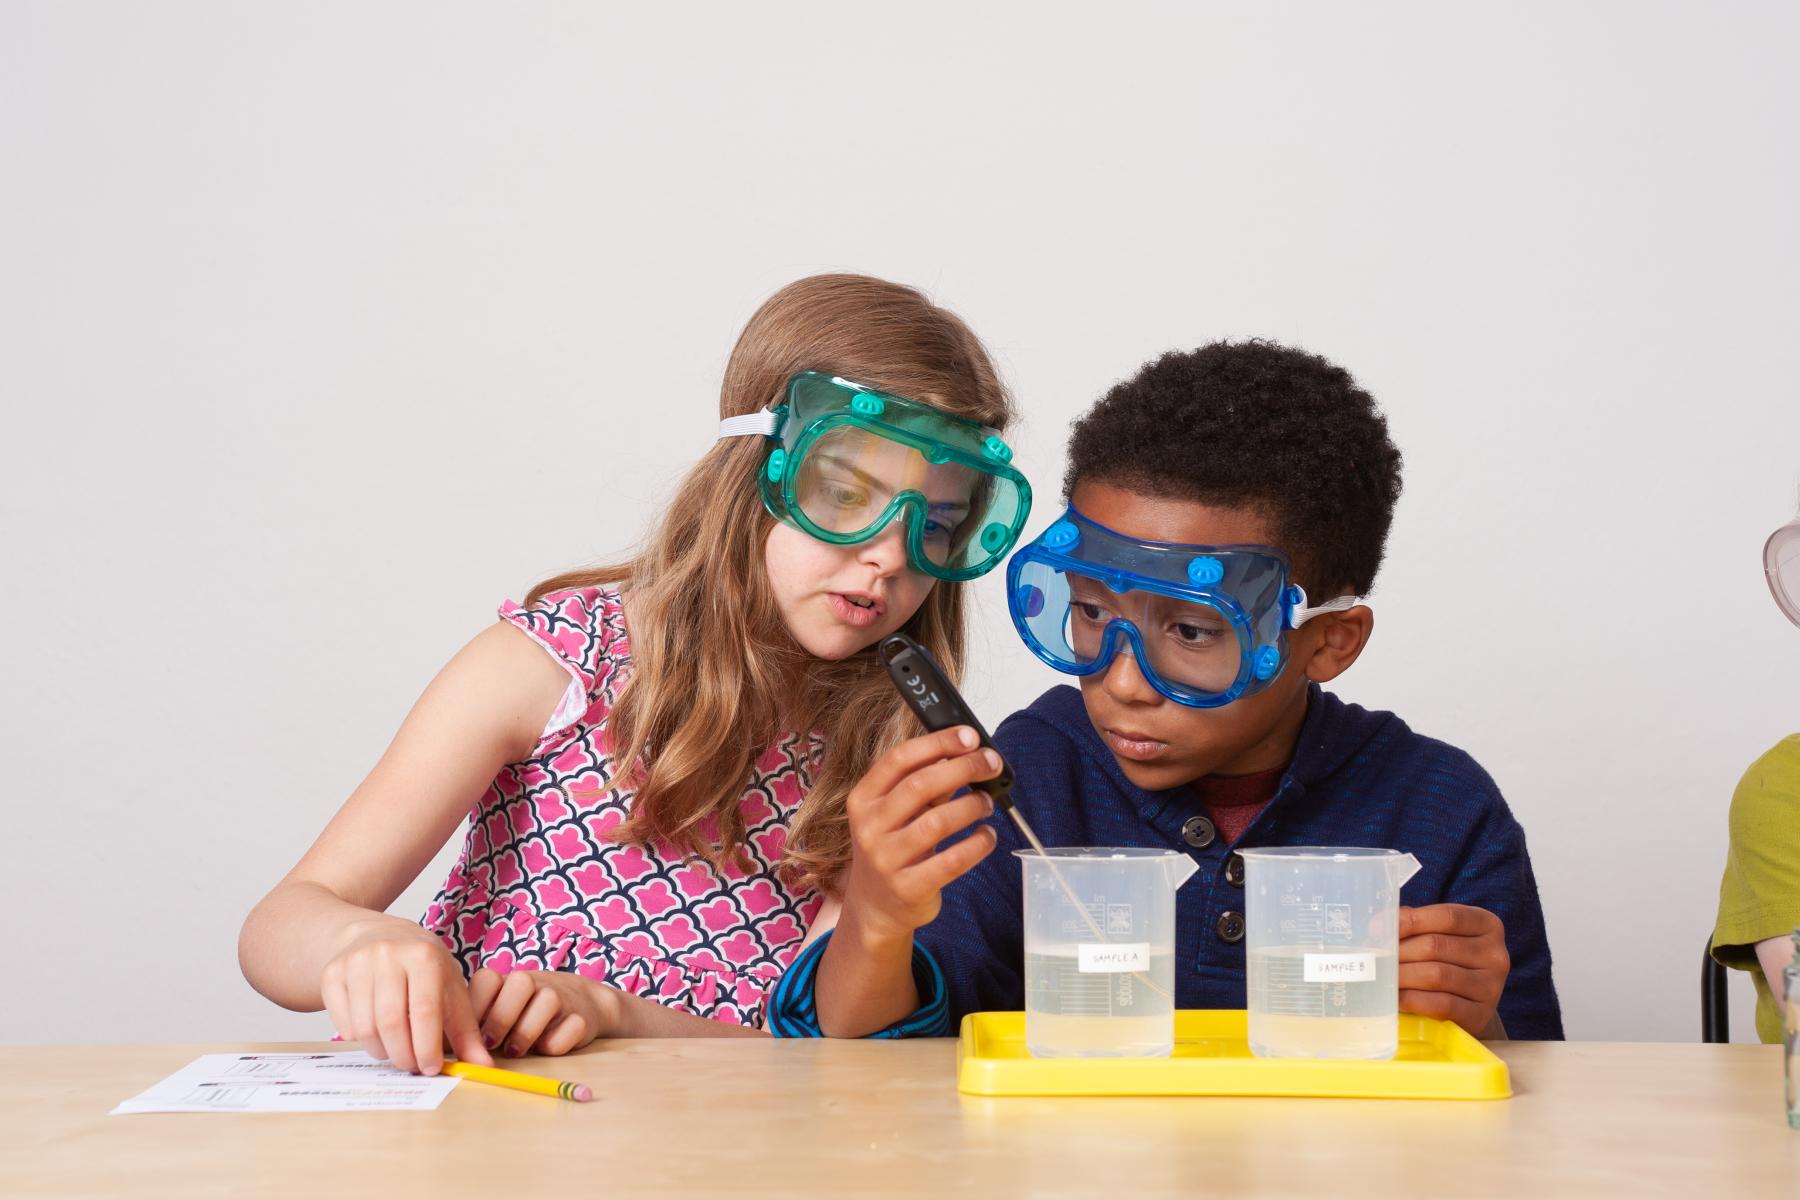 Two learners wearing goggles measure water temperature with a thermometer